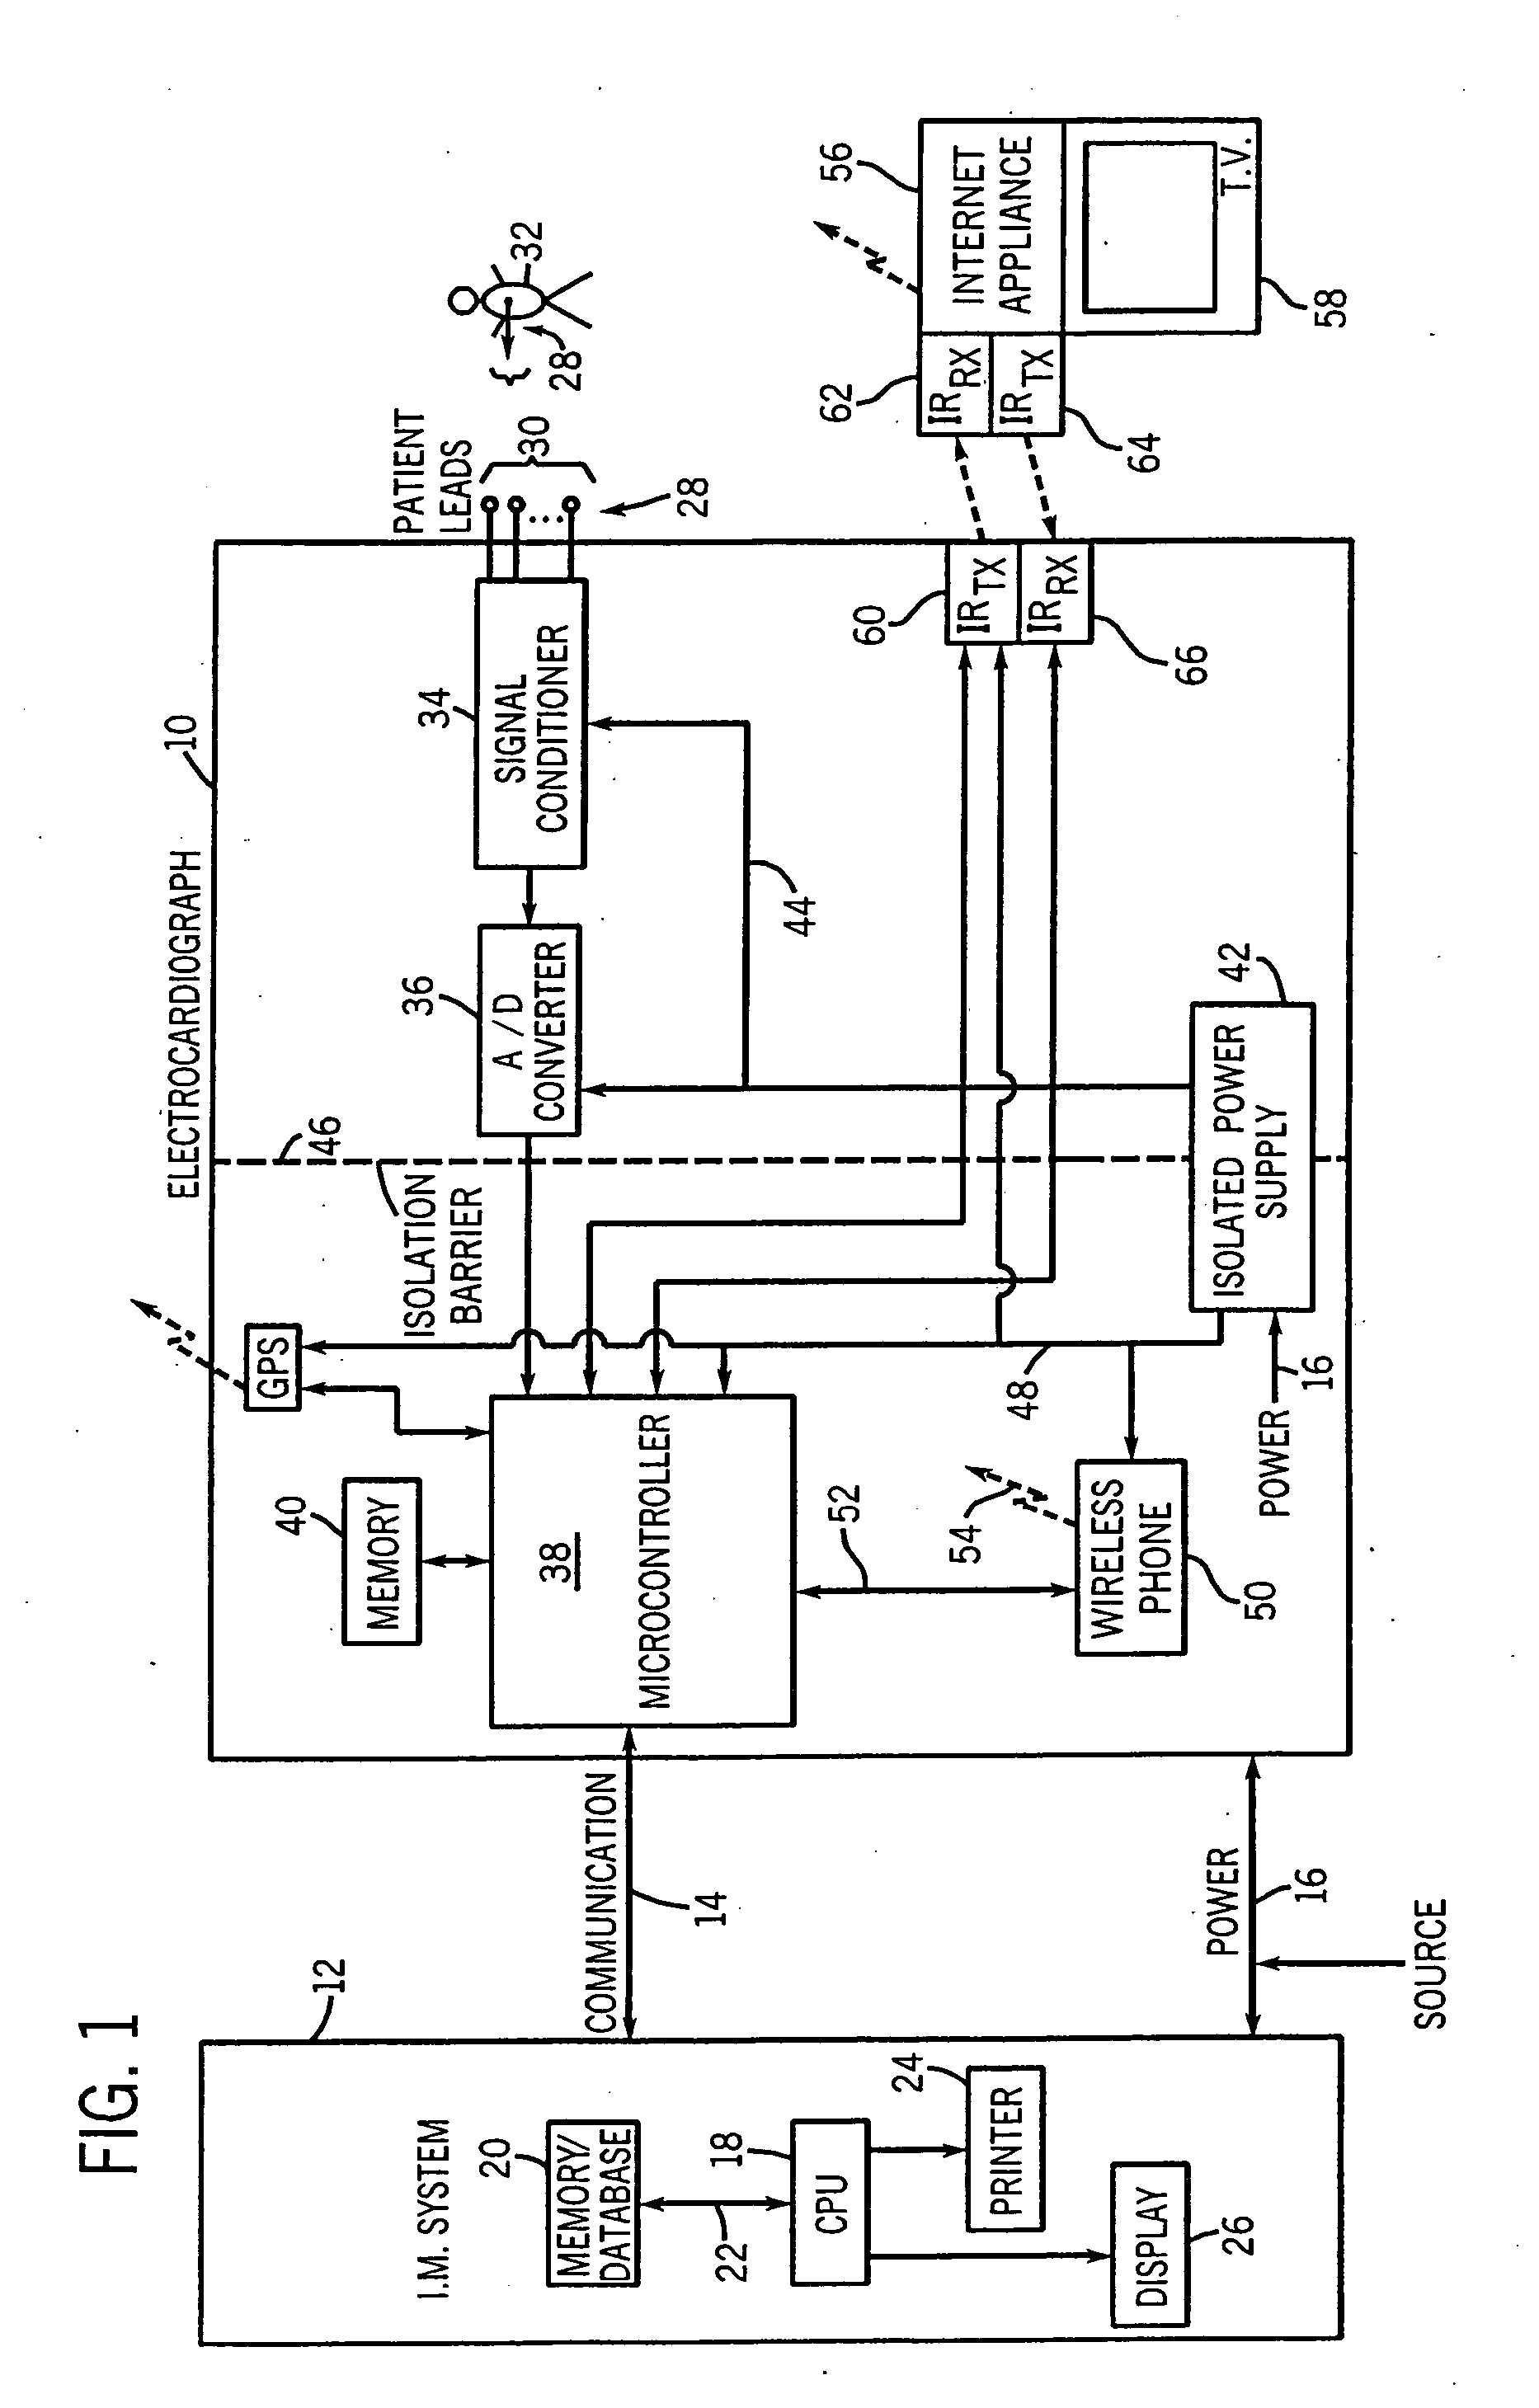 Portable ECG device with wireless communication interface to remotely monitor patients and method of use